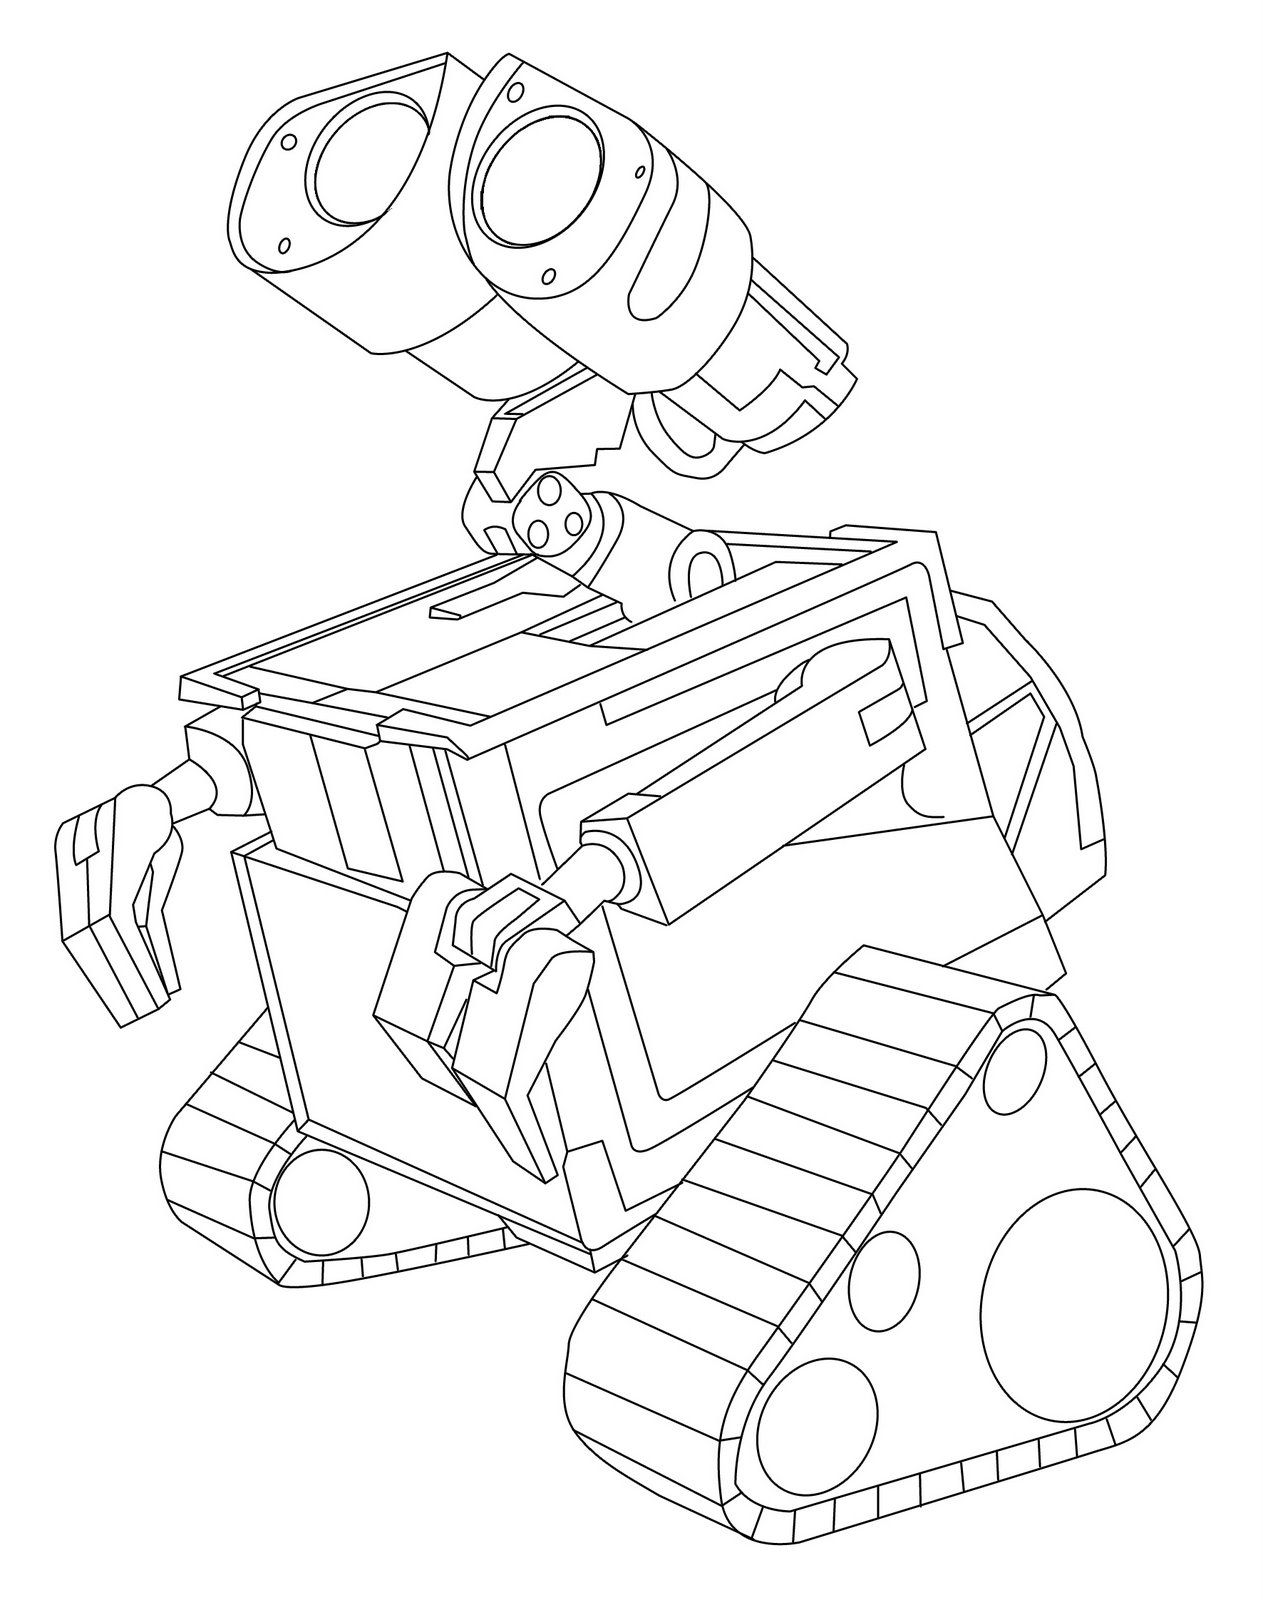 WALLE Coloring Pages Best Coloring Pages For Kids